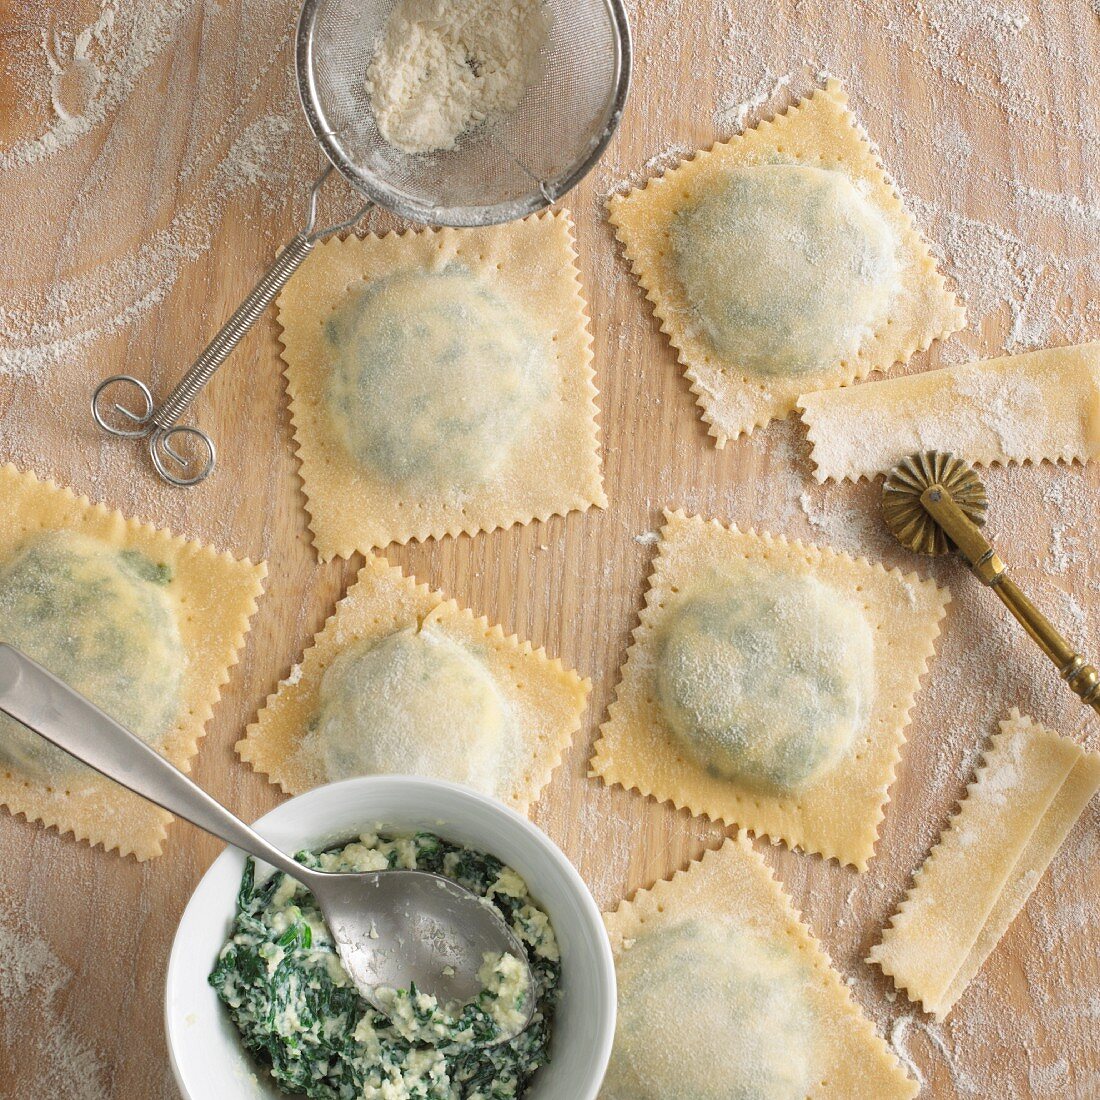 Making ravioli with spinach and ricotta filling